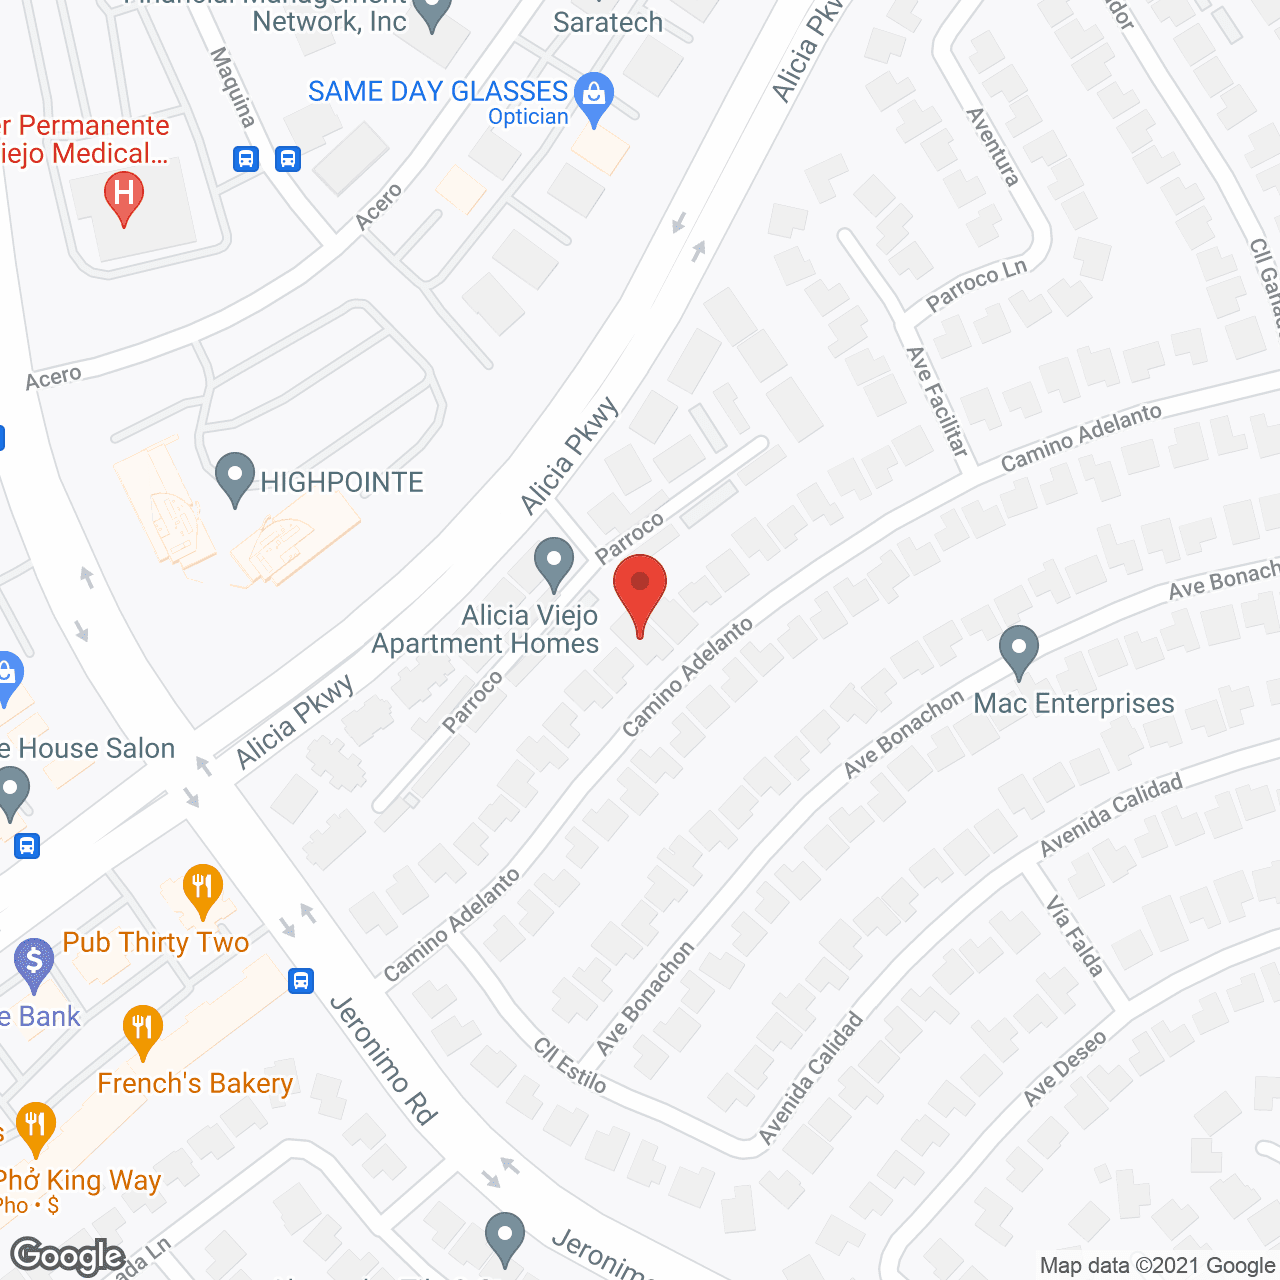 Infinity Home Care in google map